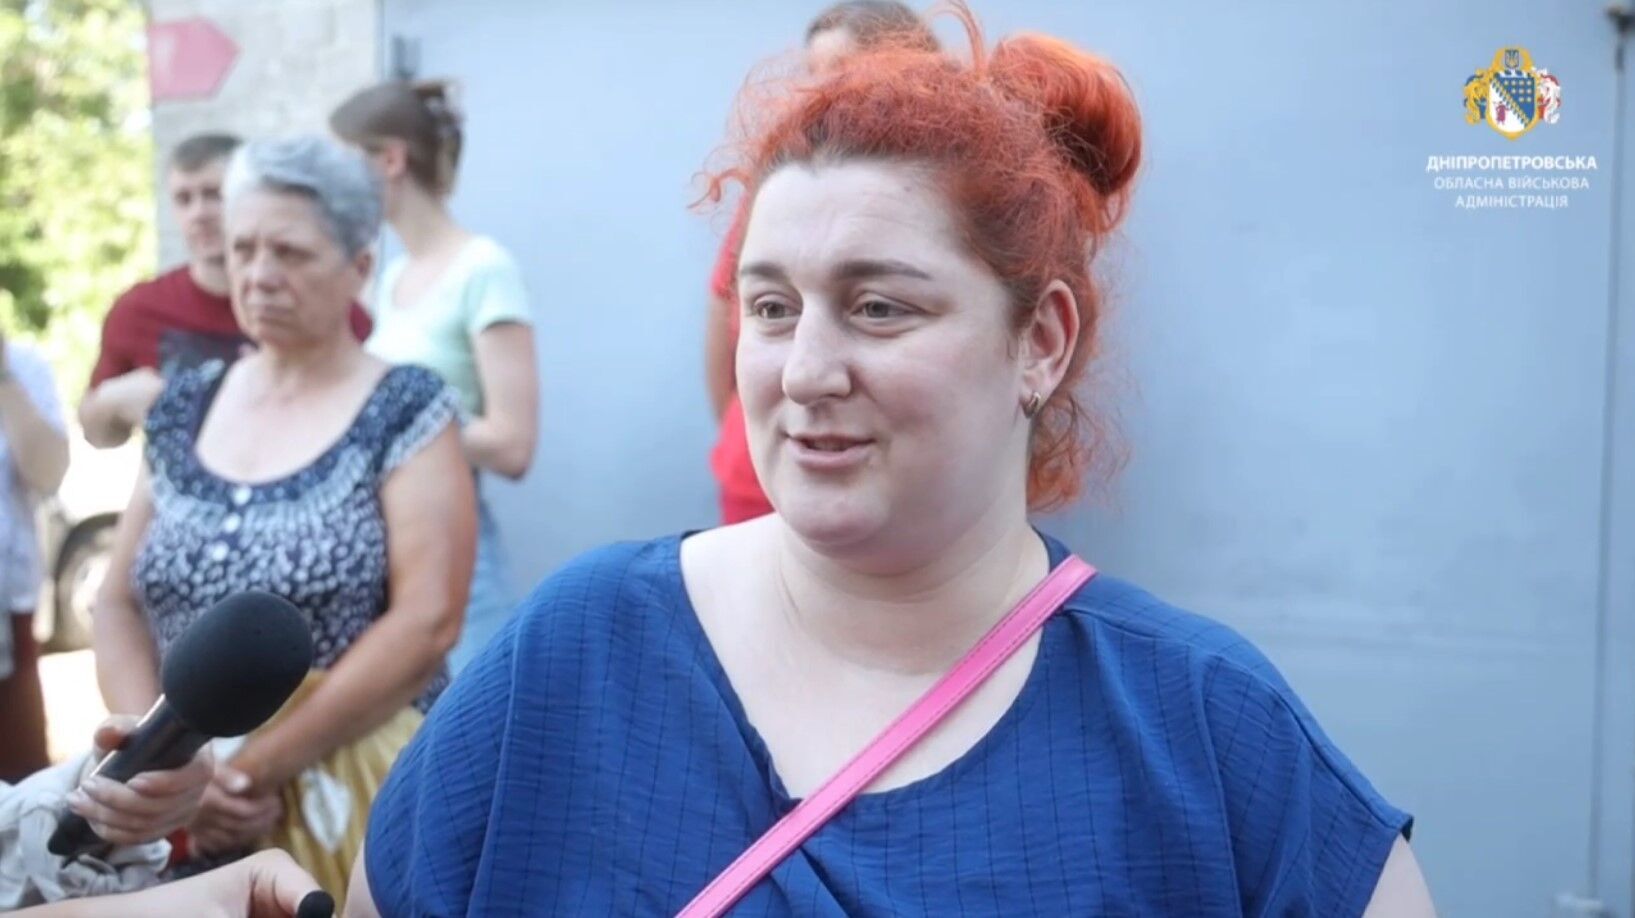 ''Still shaking'': residents of Dnipro recount the moment of the Russian attack. Video